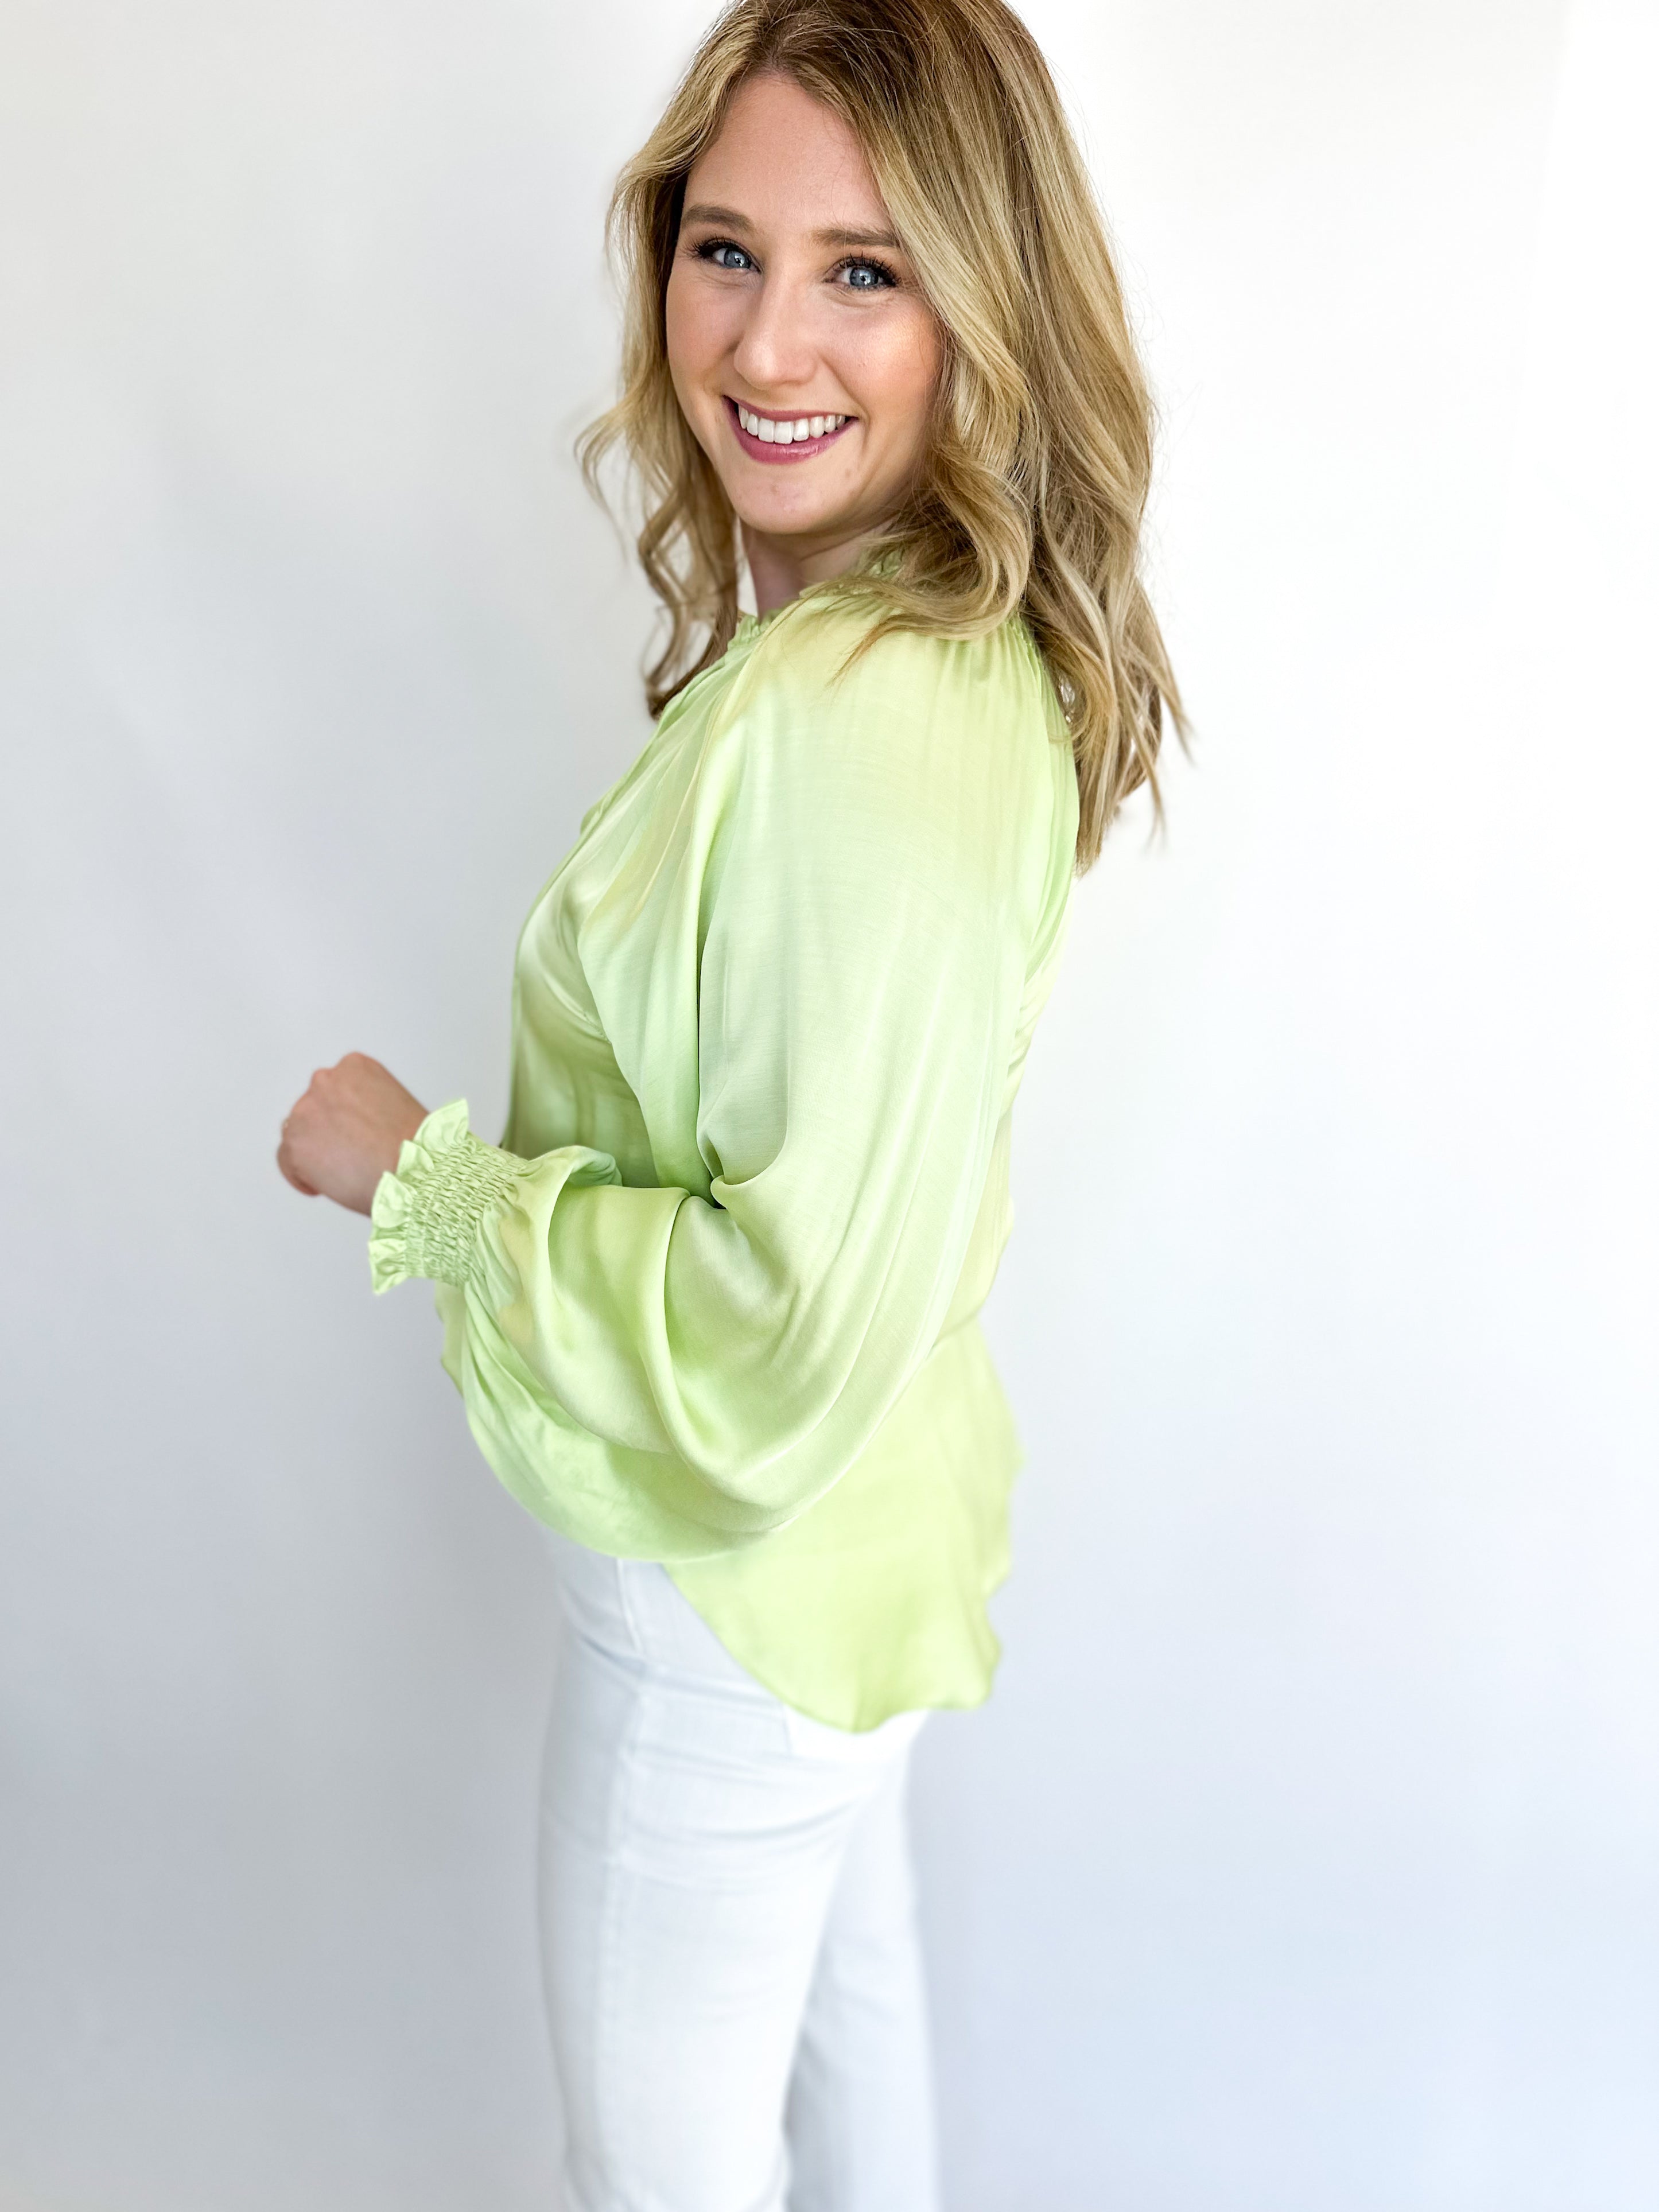 Pastel Satin Blouse - Lime-200 Fashion Blouses-OLIVACEOUS-July & June Women's Fashion Boutique Located in San Antonio, Texas